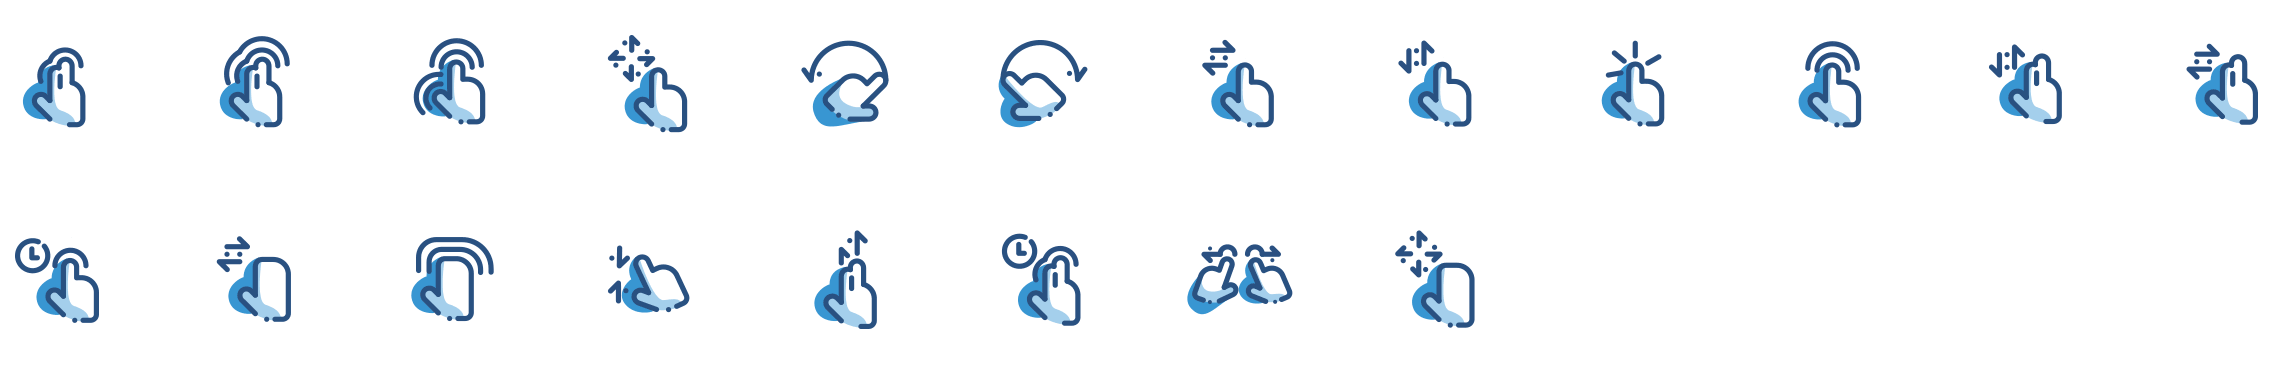 touch-gestures-icons-set-preview